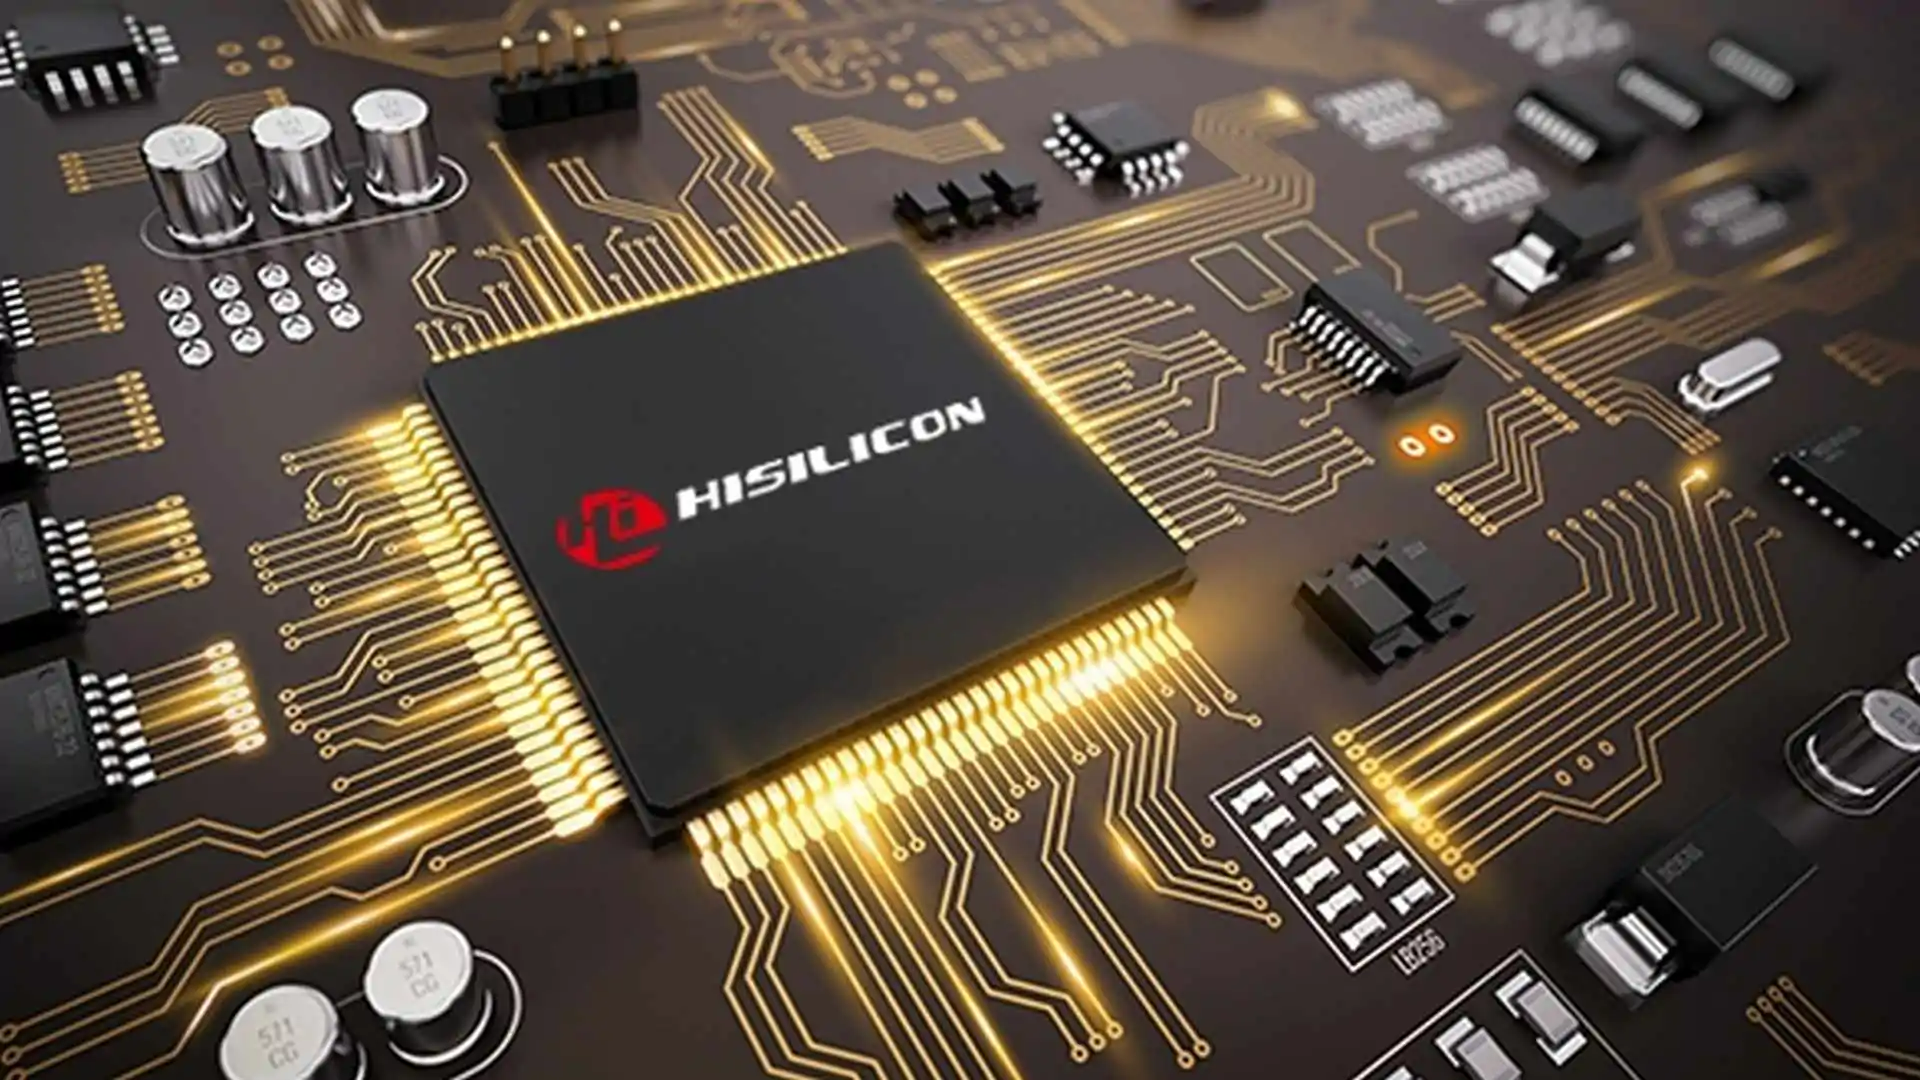 Huawei has used up all accumulated stocks of HiSilicon single-chip systems